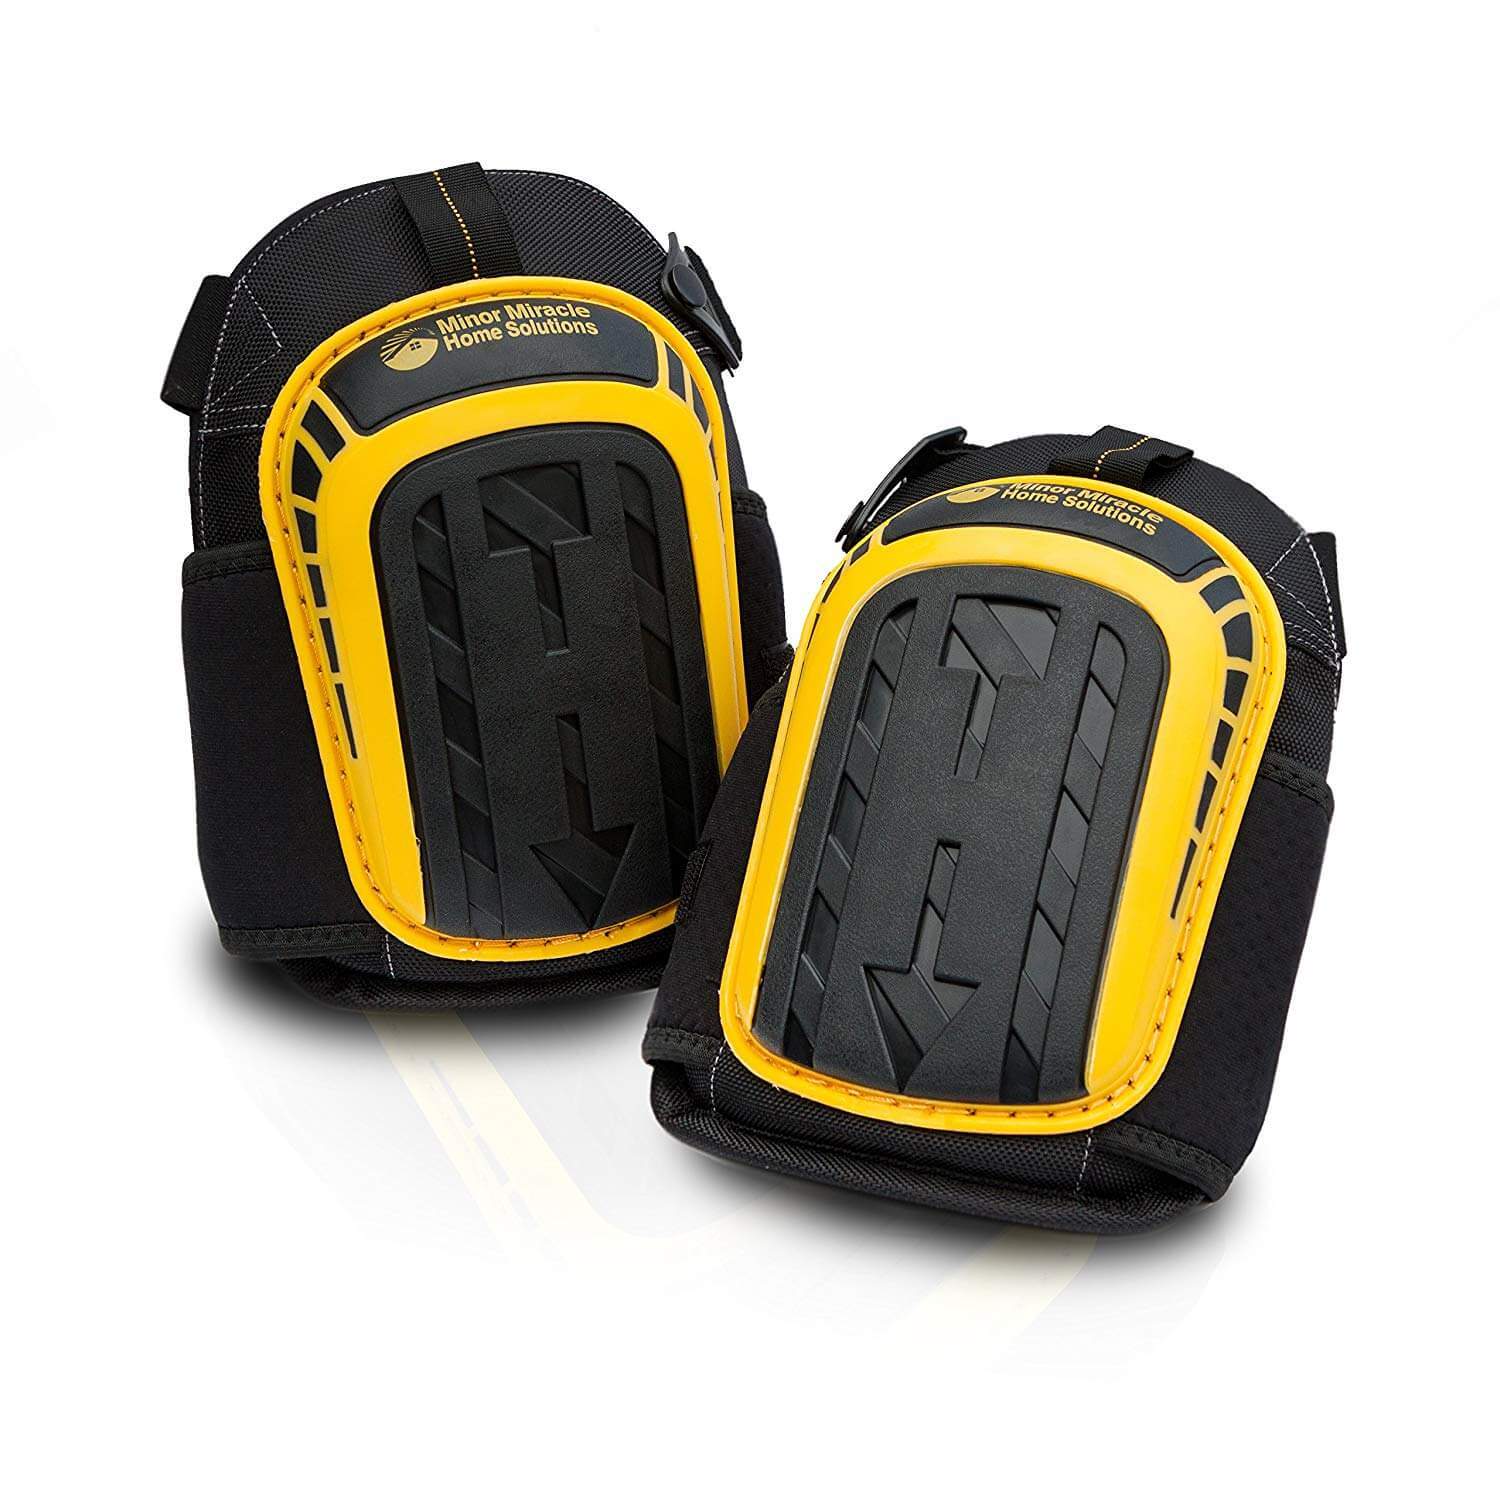 Professional Knee Pads with Layered Gel by Minor Miracle Home Solutions